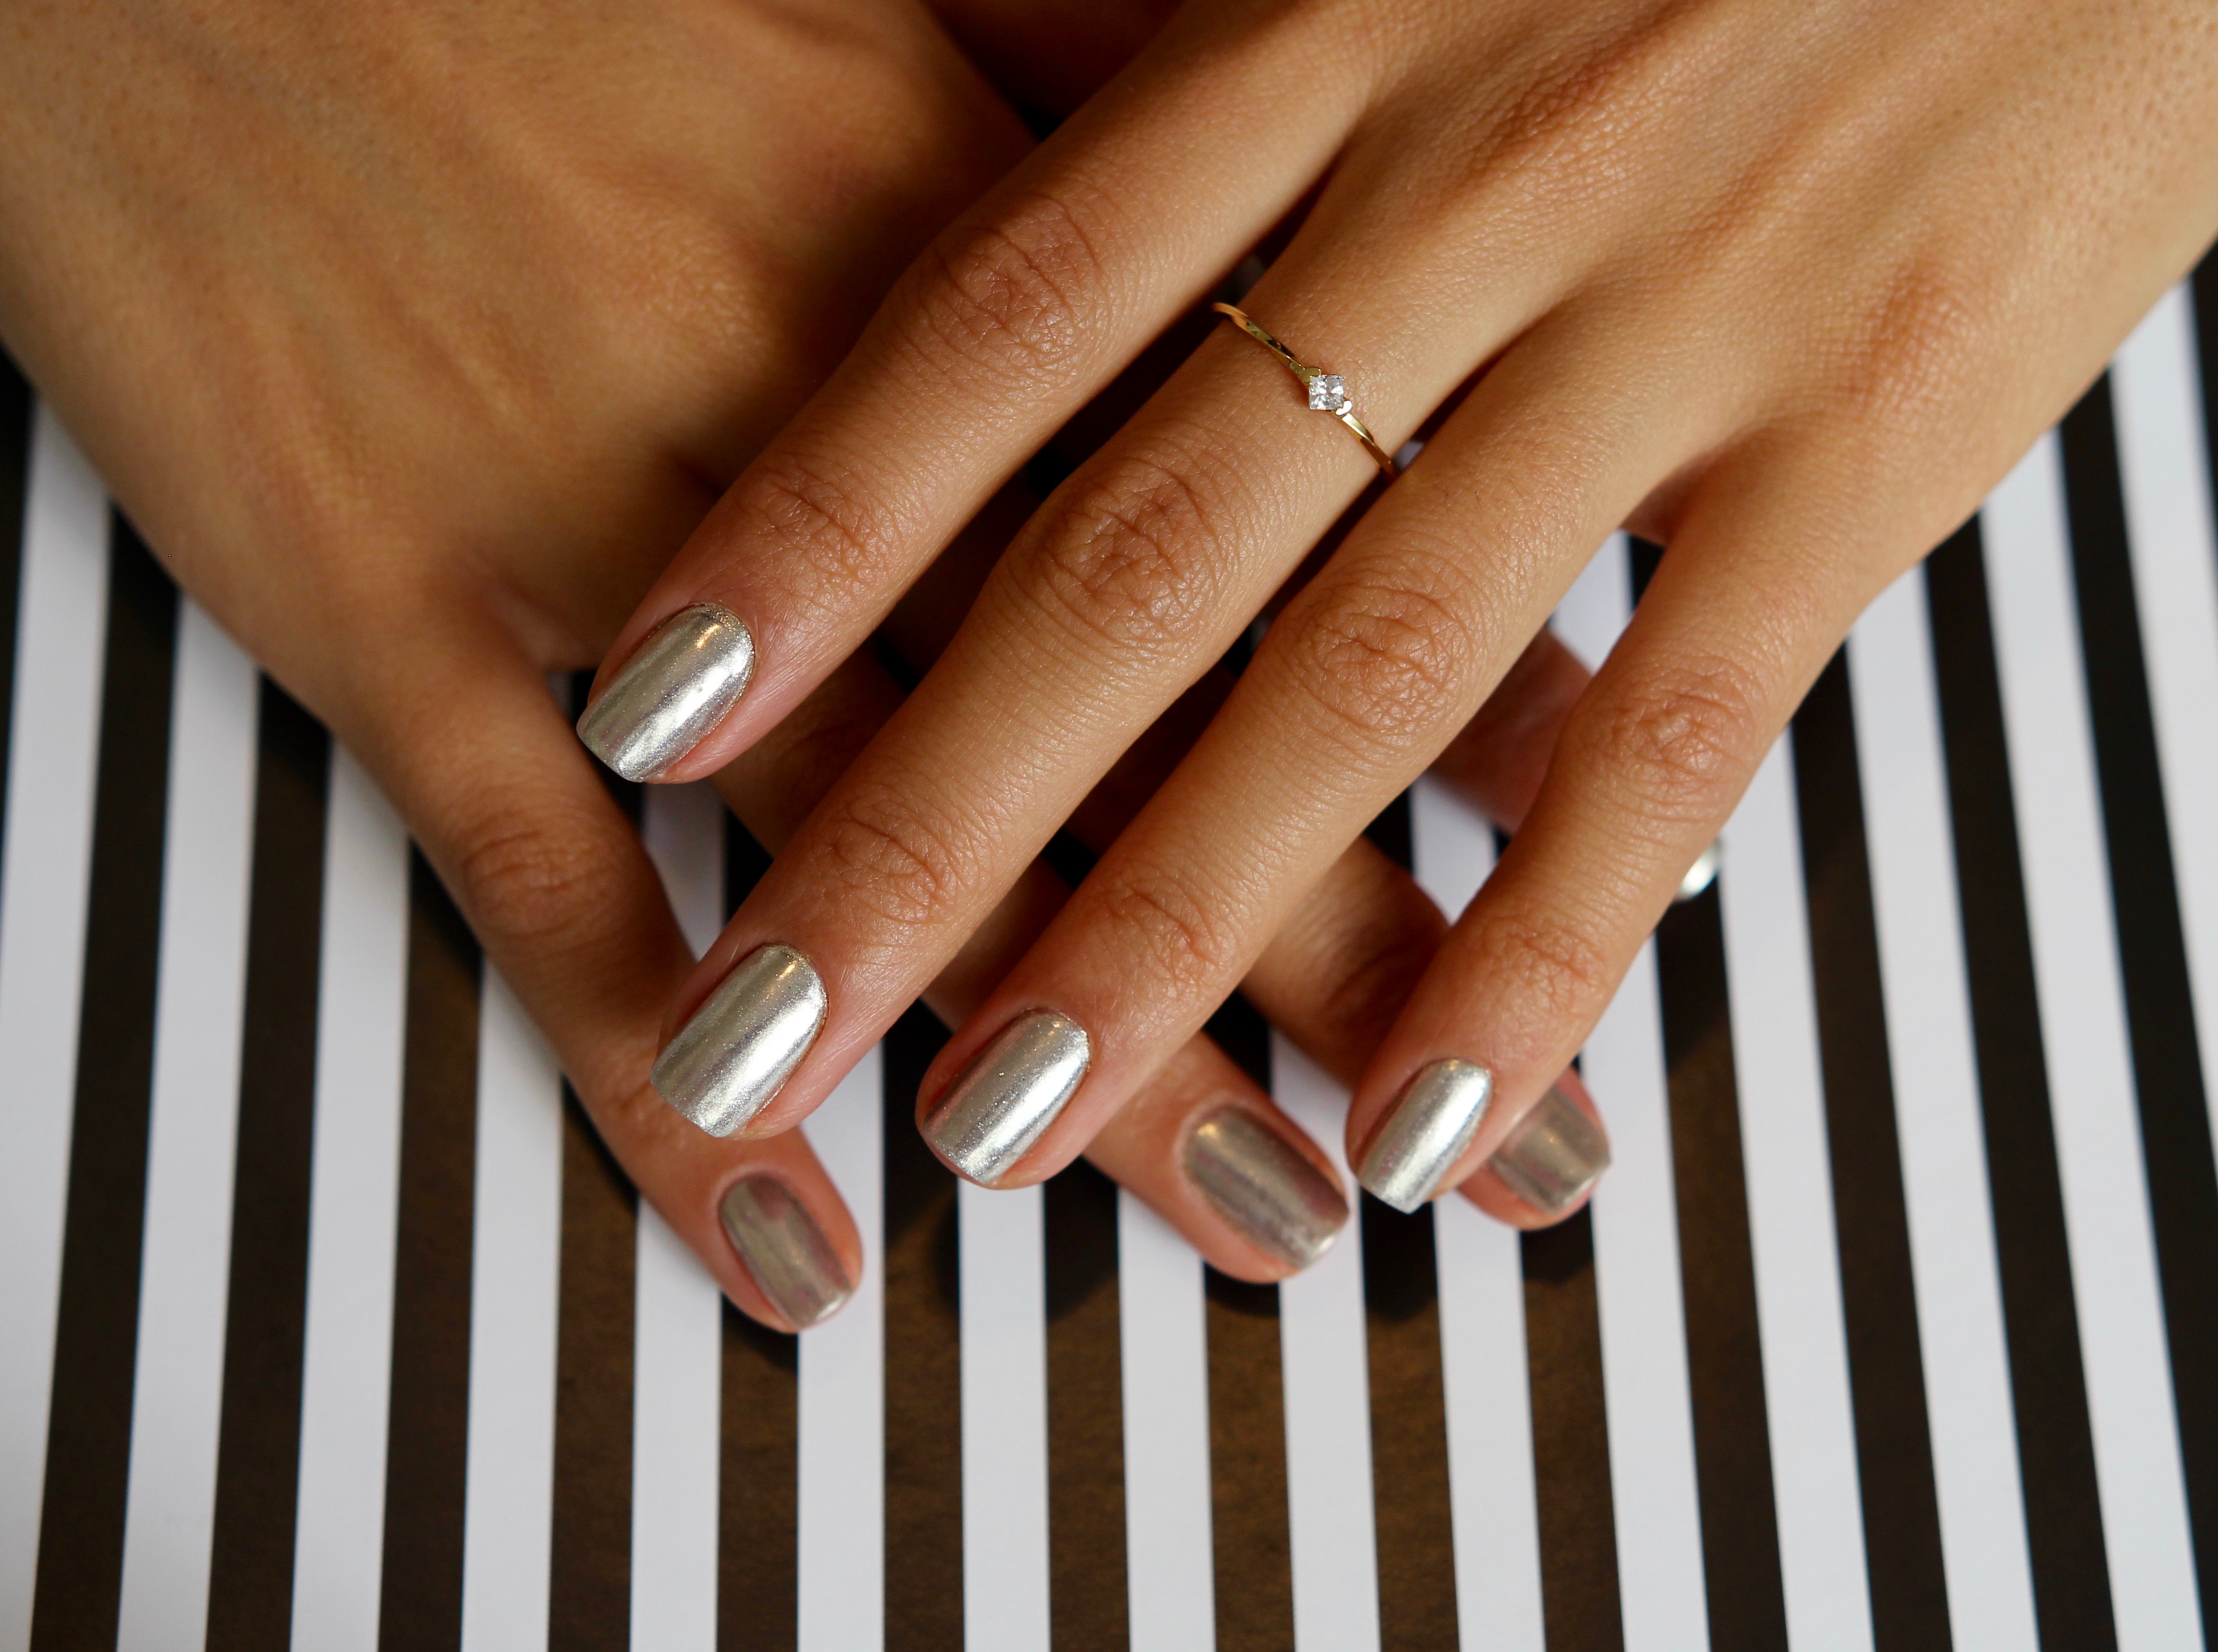 6. "The Best Nail Colors to Make Your Chrome Nails Pop" - wide 3